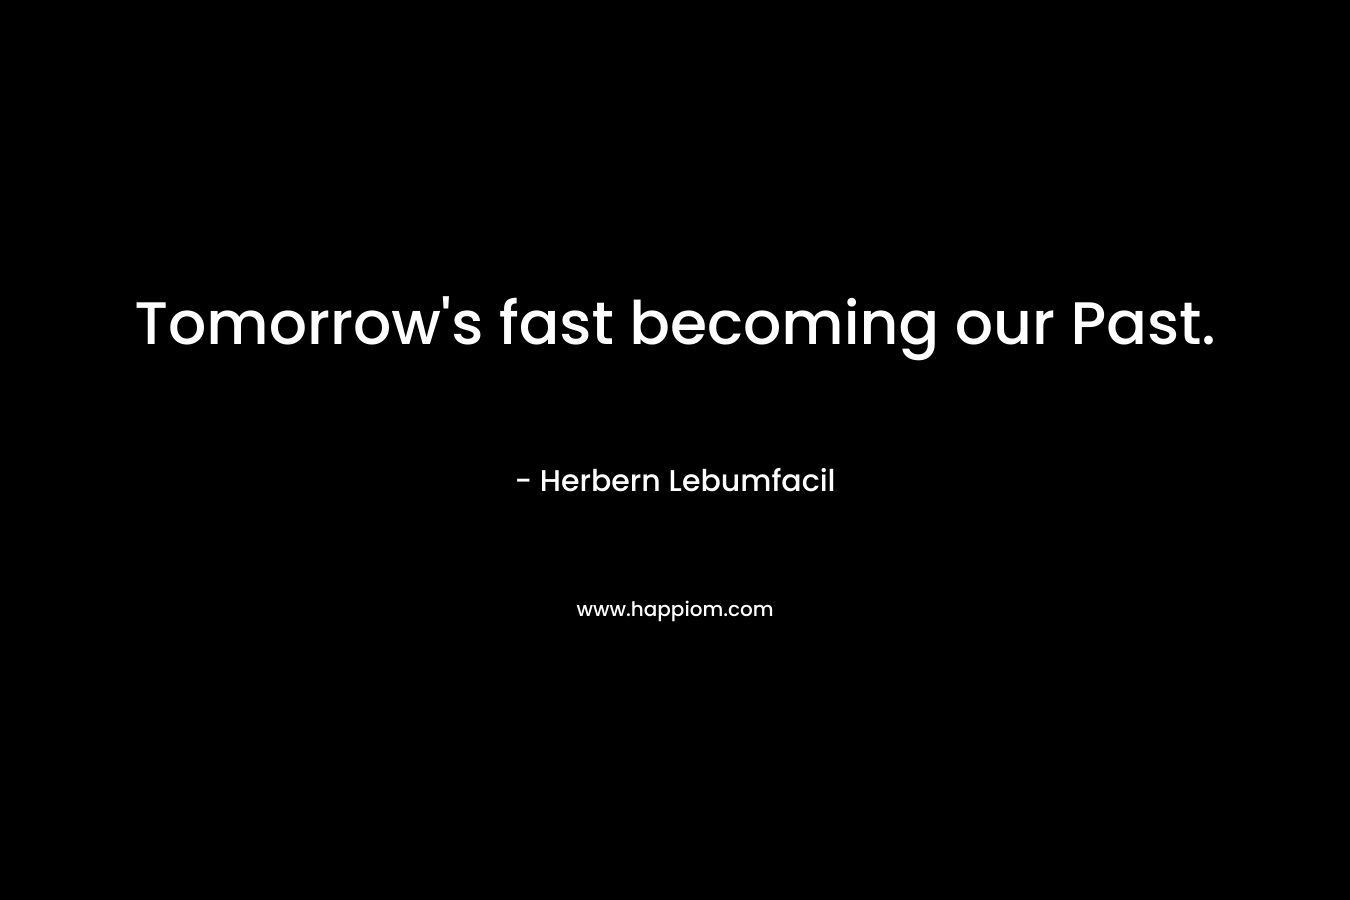 Tomorrow's fast becoming our Past.